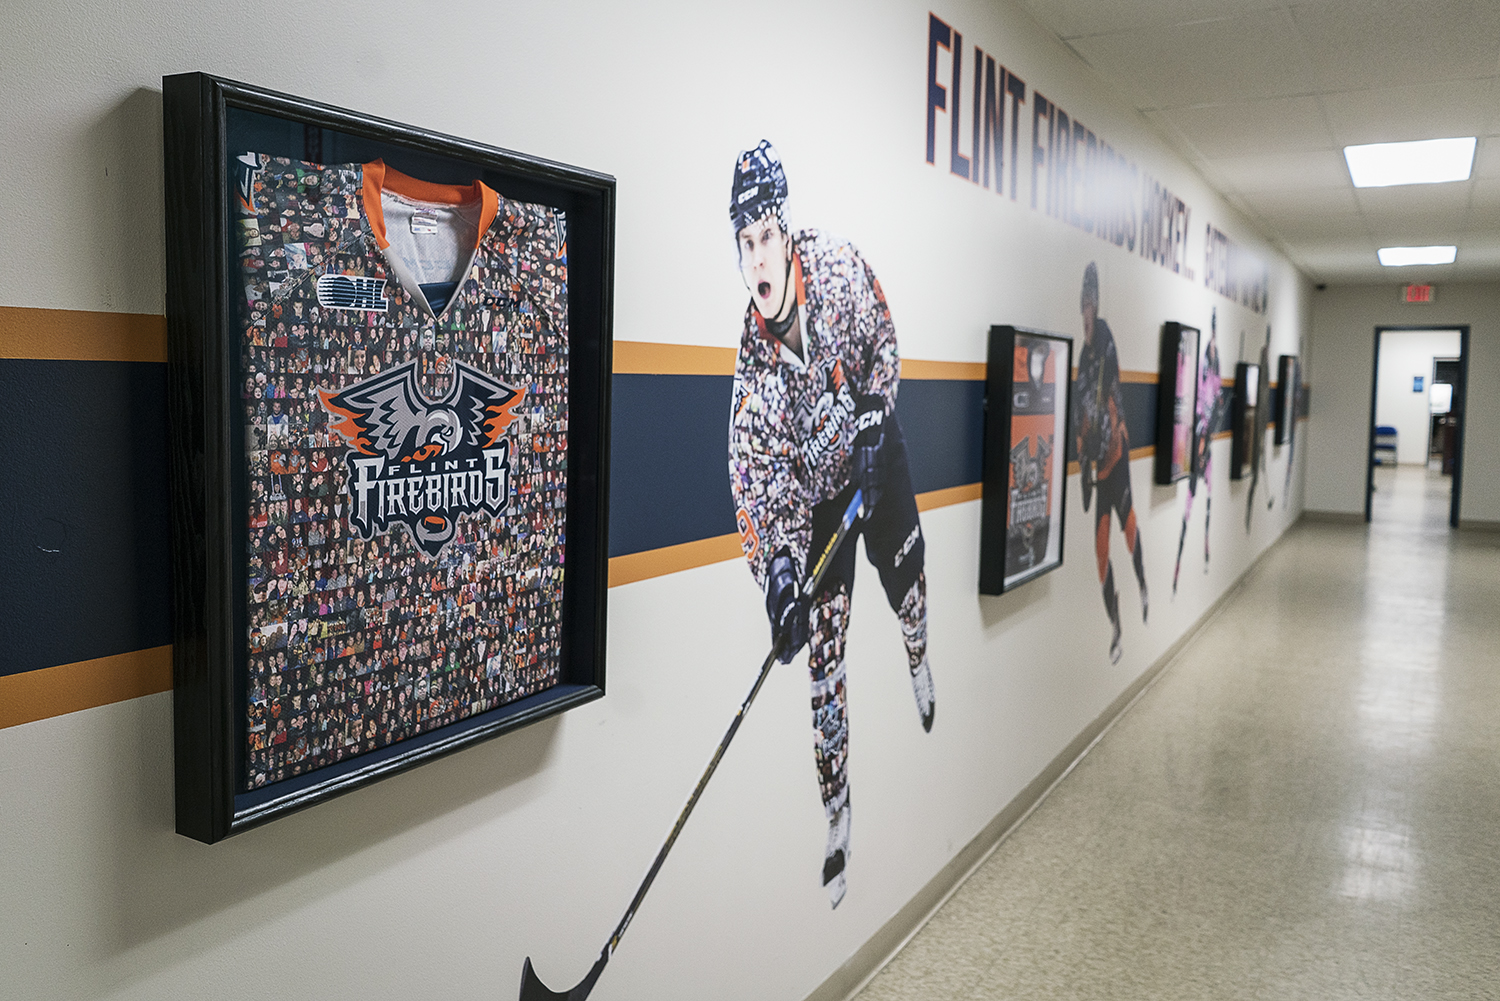 Flint, MI - Tuesday, January 30, 2018: The administration area hallways are decorated with past and present jerseys of the Flint Firebirds at the Dort Federal Event Center.